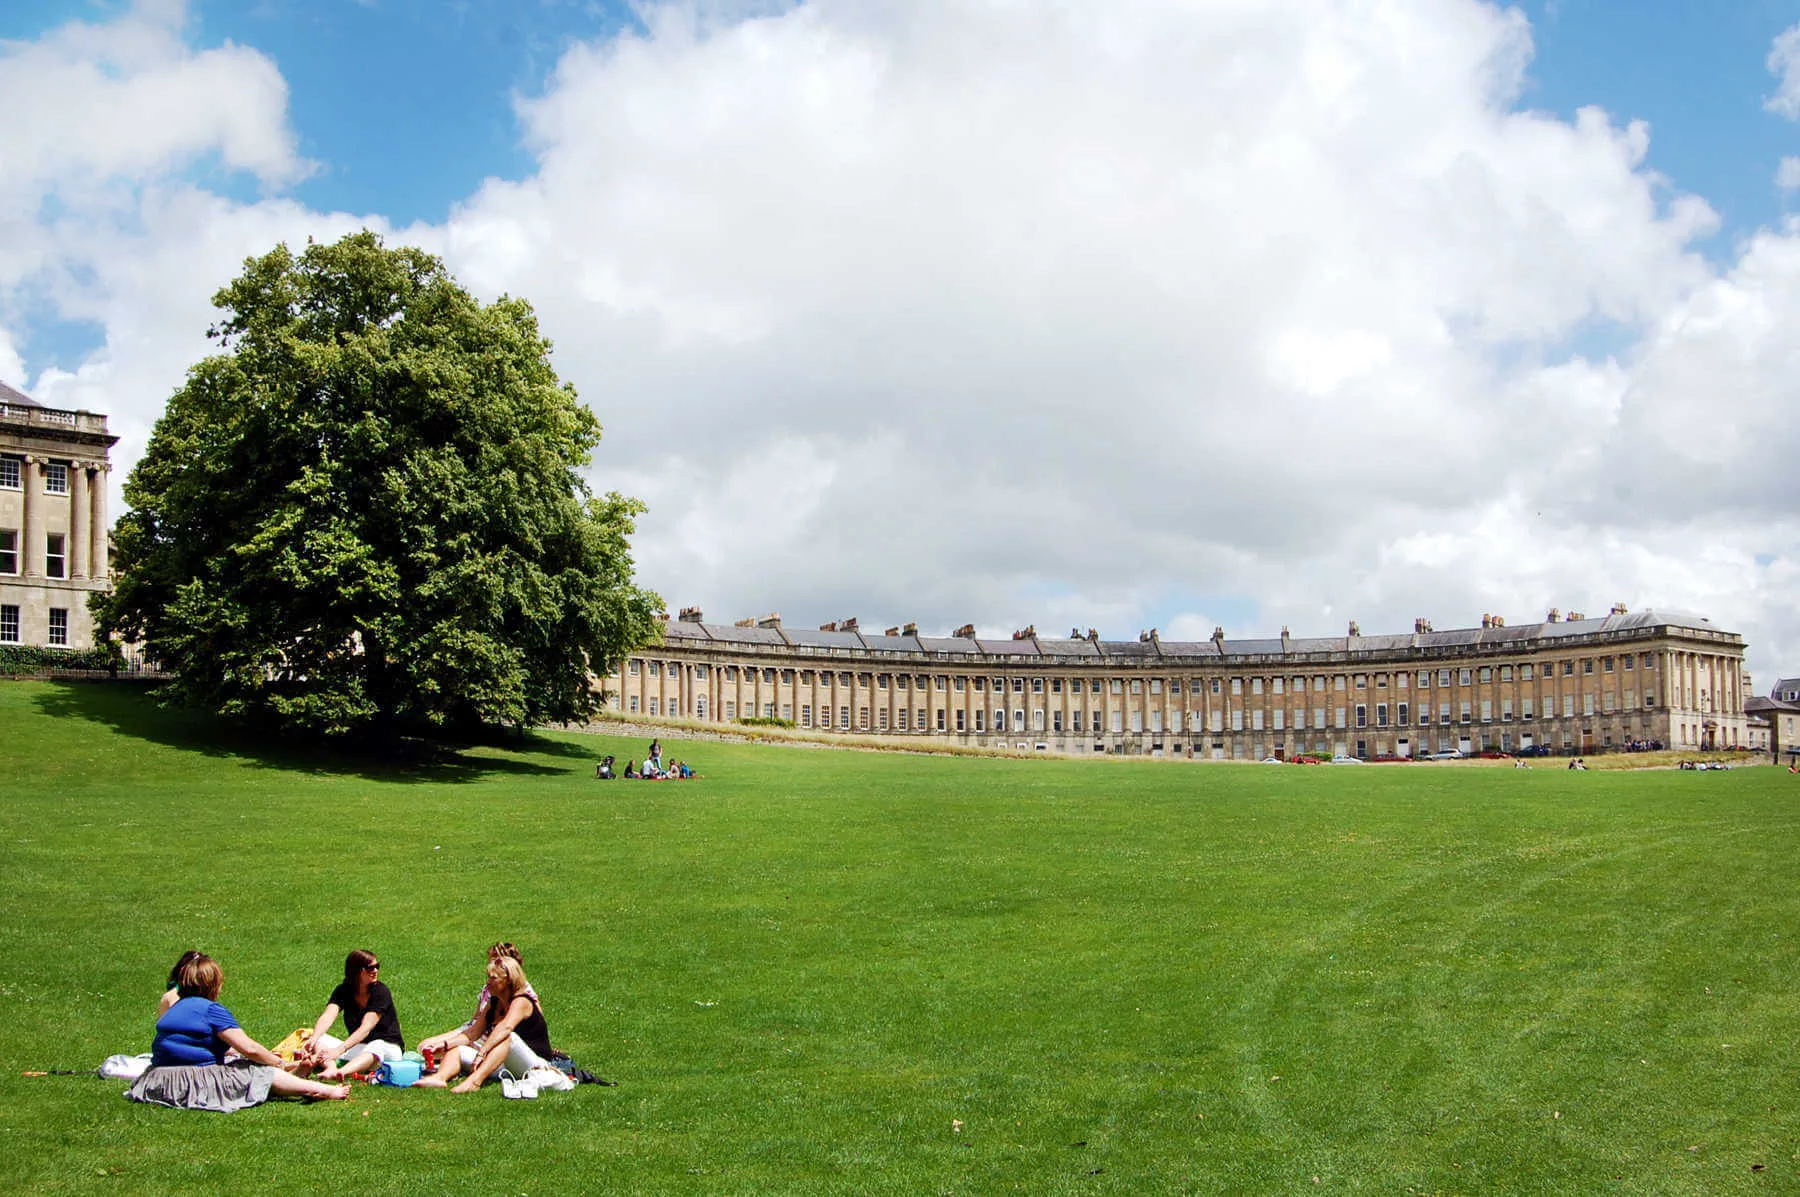 A big, grassy park edges Bath's Royal Crescent, which contains some of England's finest Georgian homes